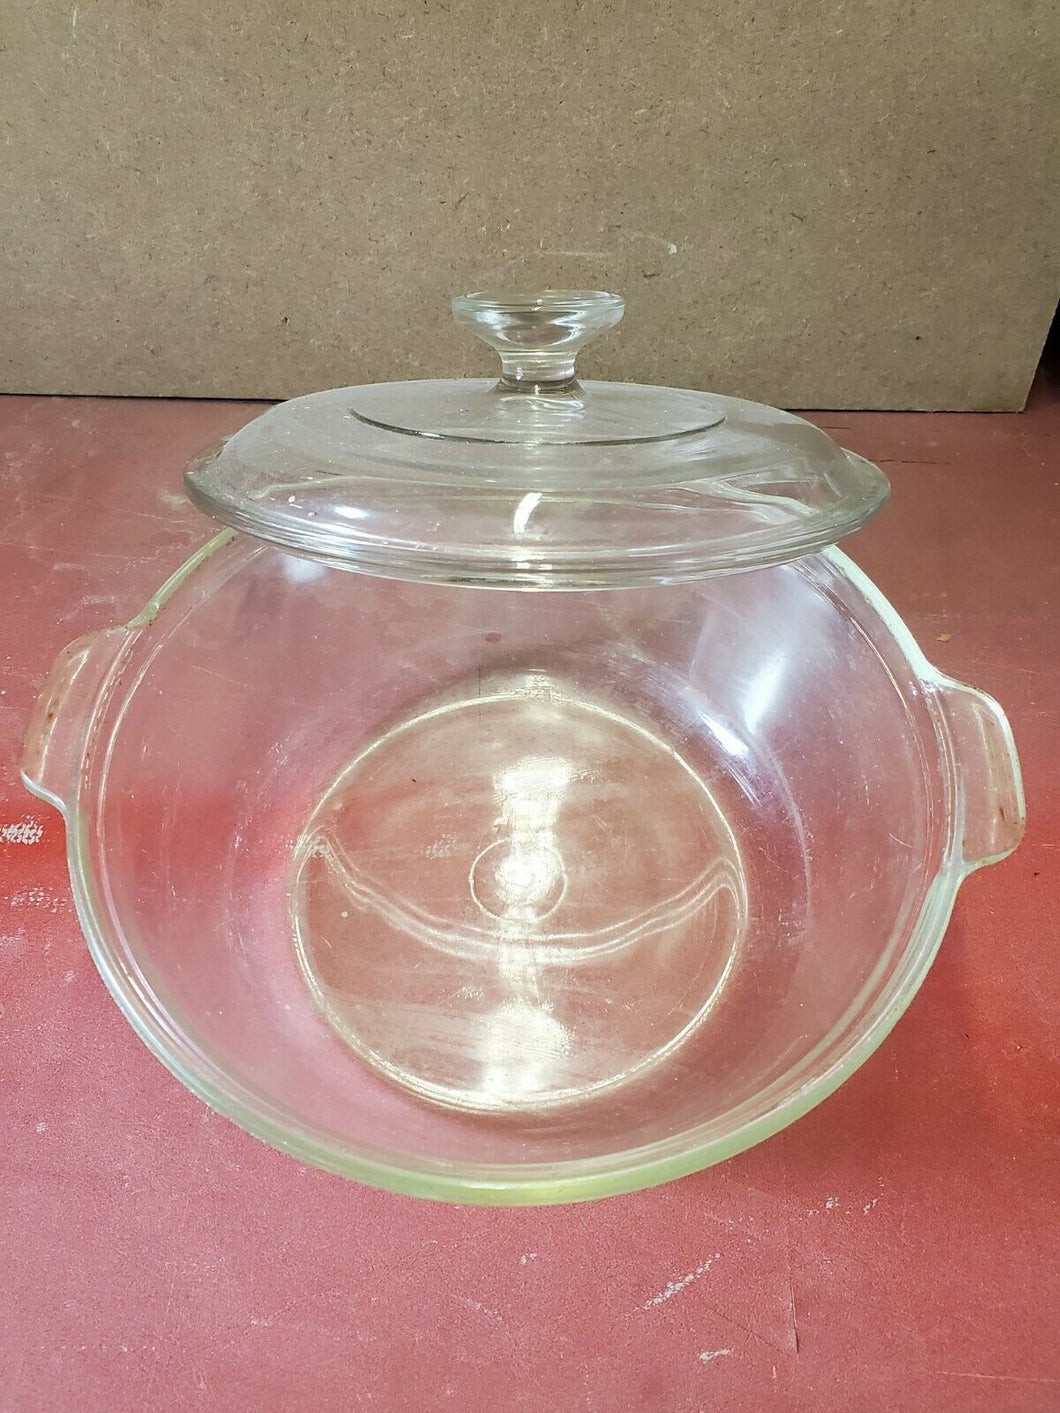 Pyrex 231 Clear Glass 1 1/2 Quart Baking Dish small chip in handle